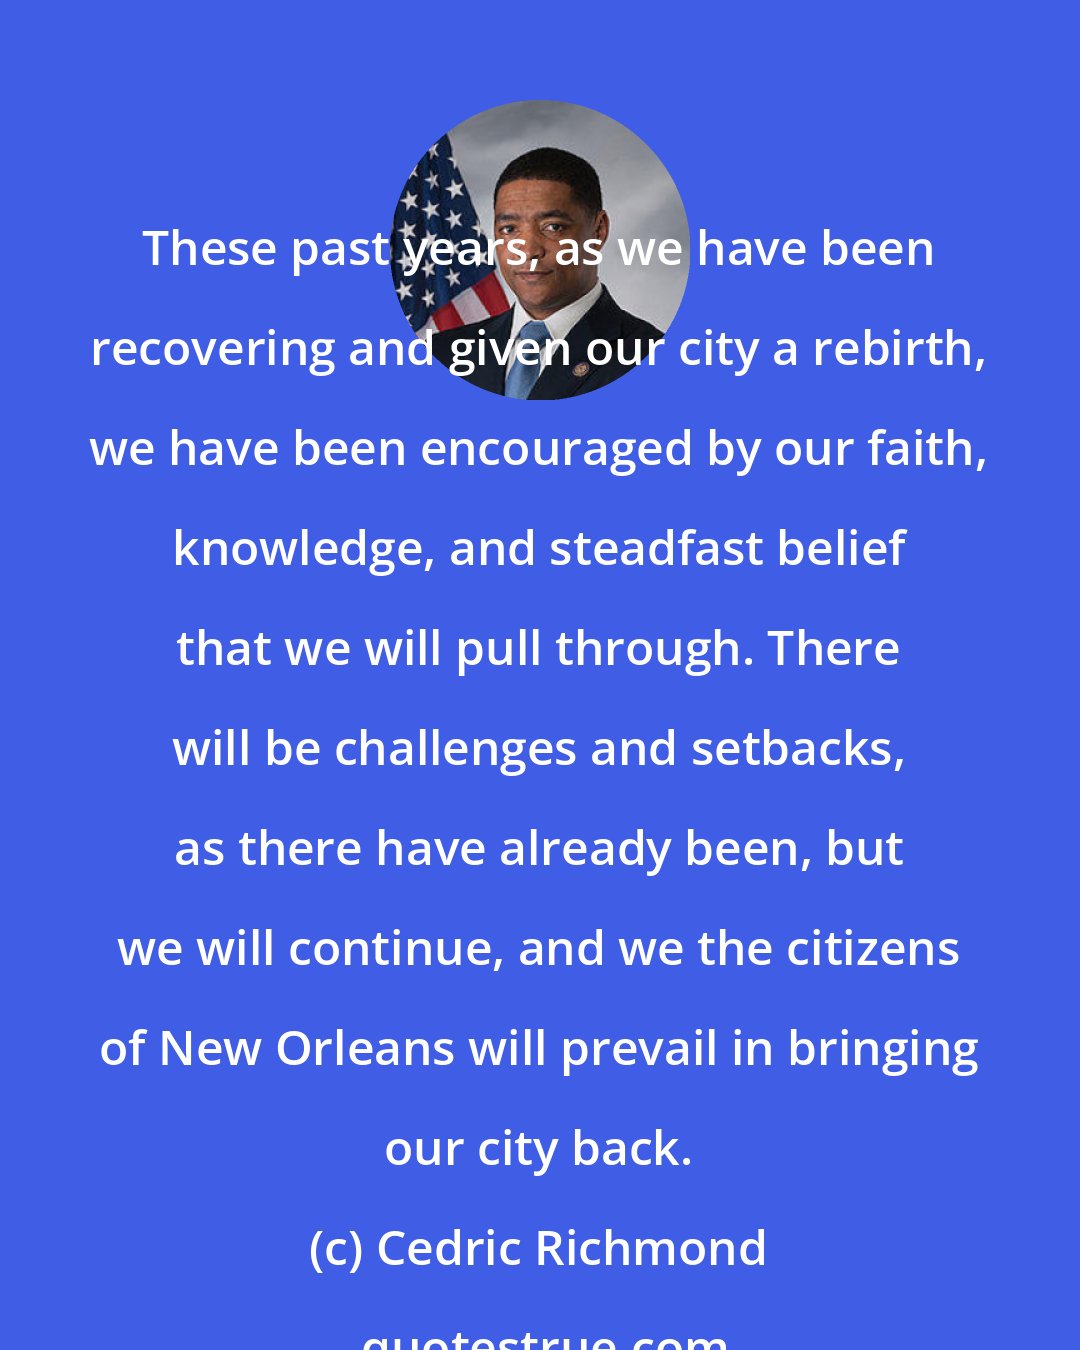 Cedric Richmond: These past years, as we have been recovering and given our city a rebirth, we have been encouraged by our faith, knowledge, and steadfast belief that we will pull through. There will be challenges and setbacks, as there have already been, but we will continue, and we the citizens of New Orleans will prevail in bringing our city back.